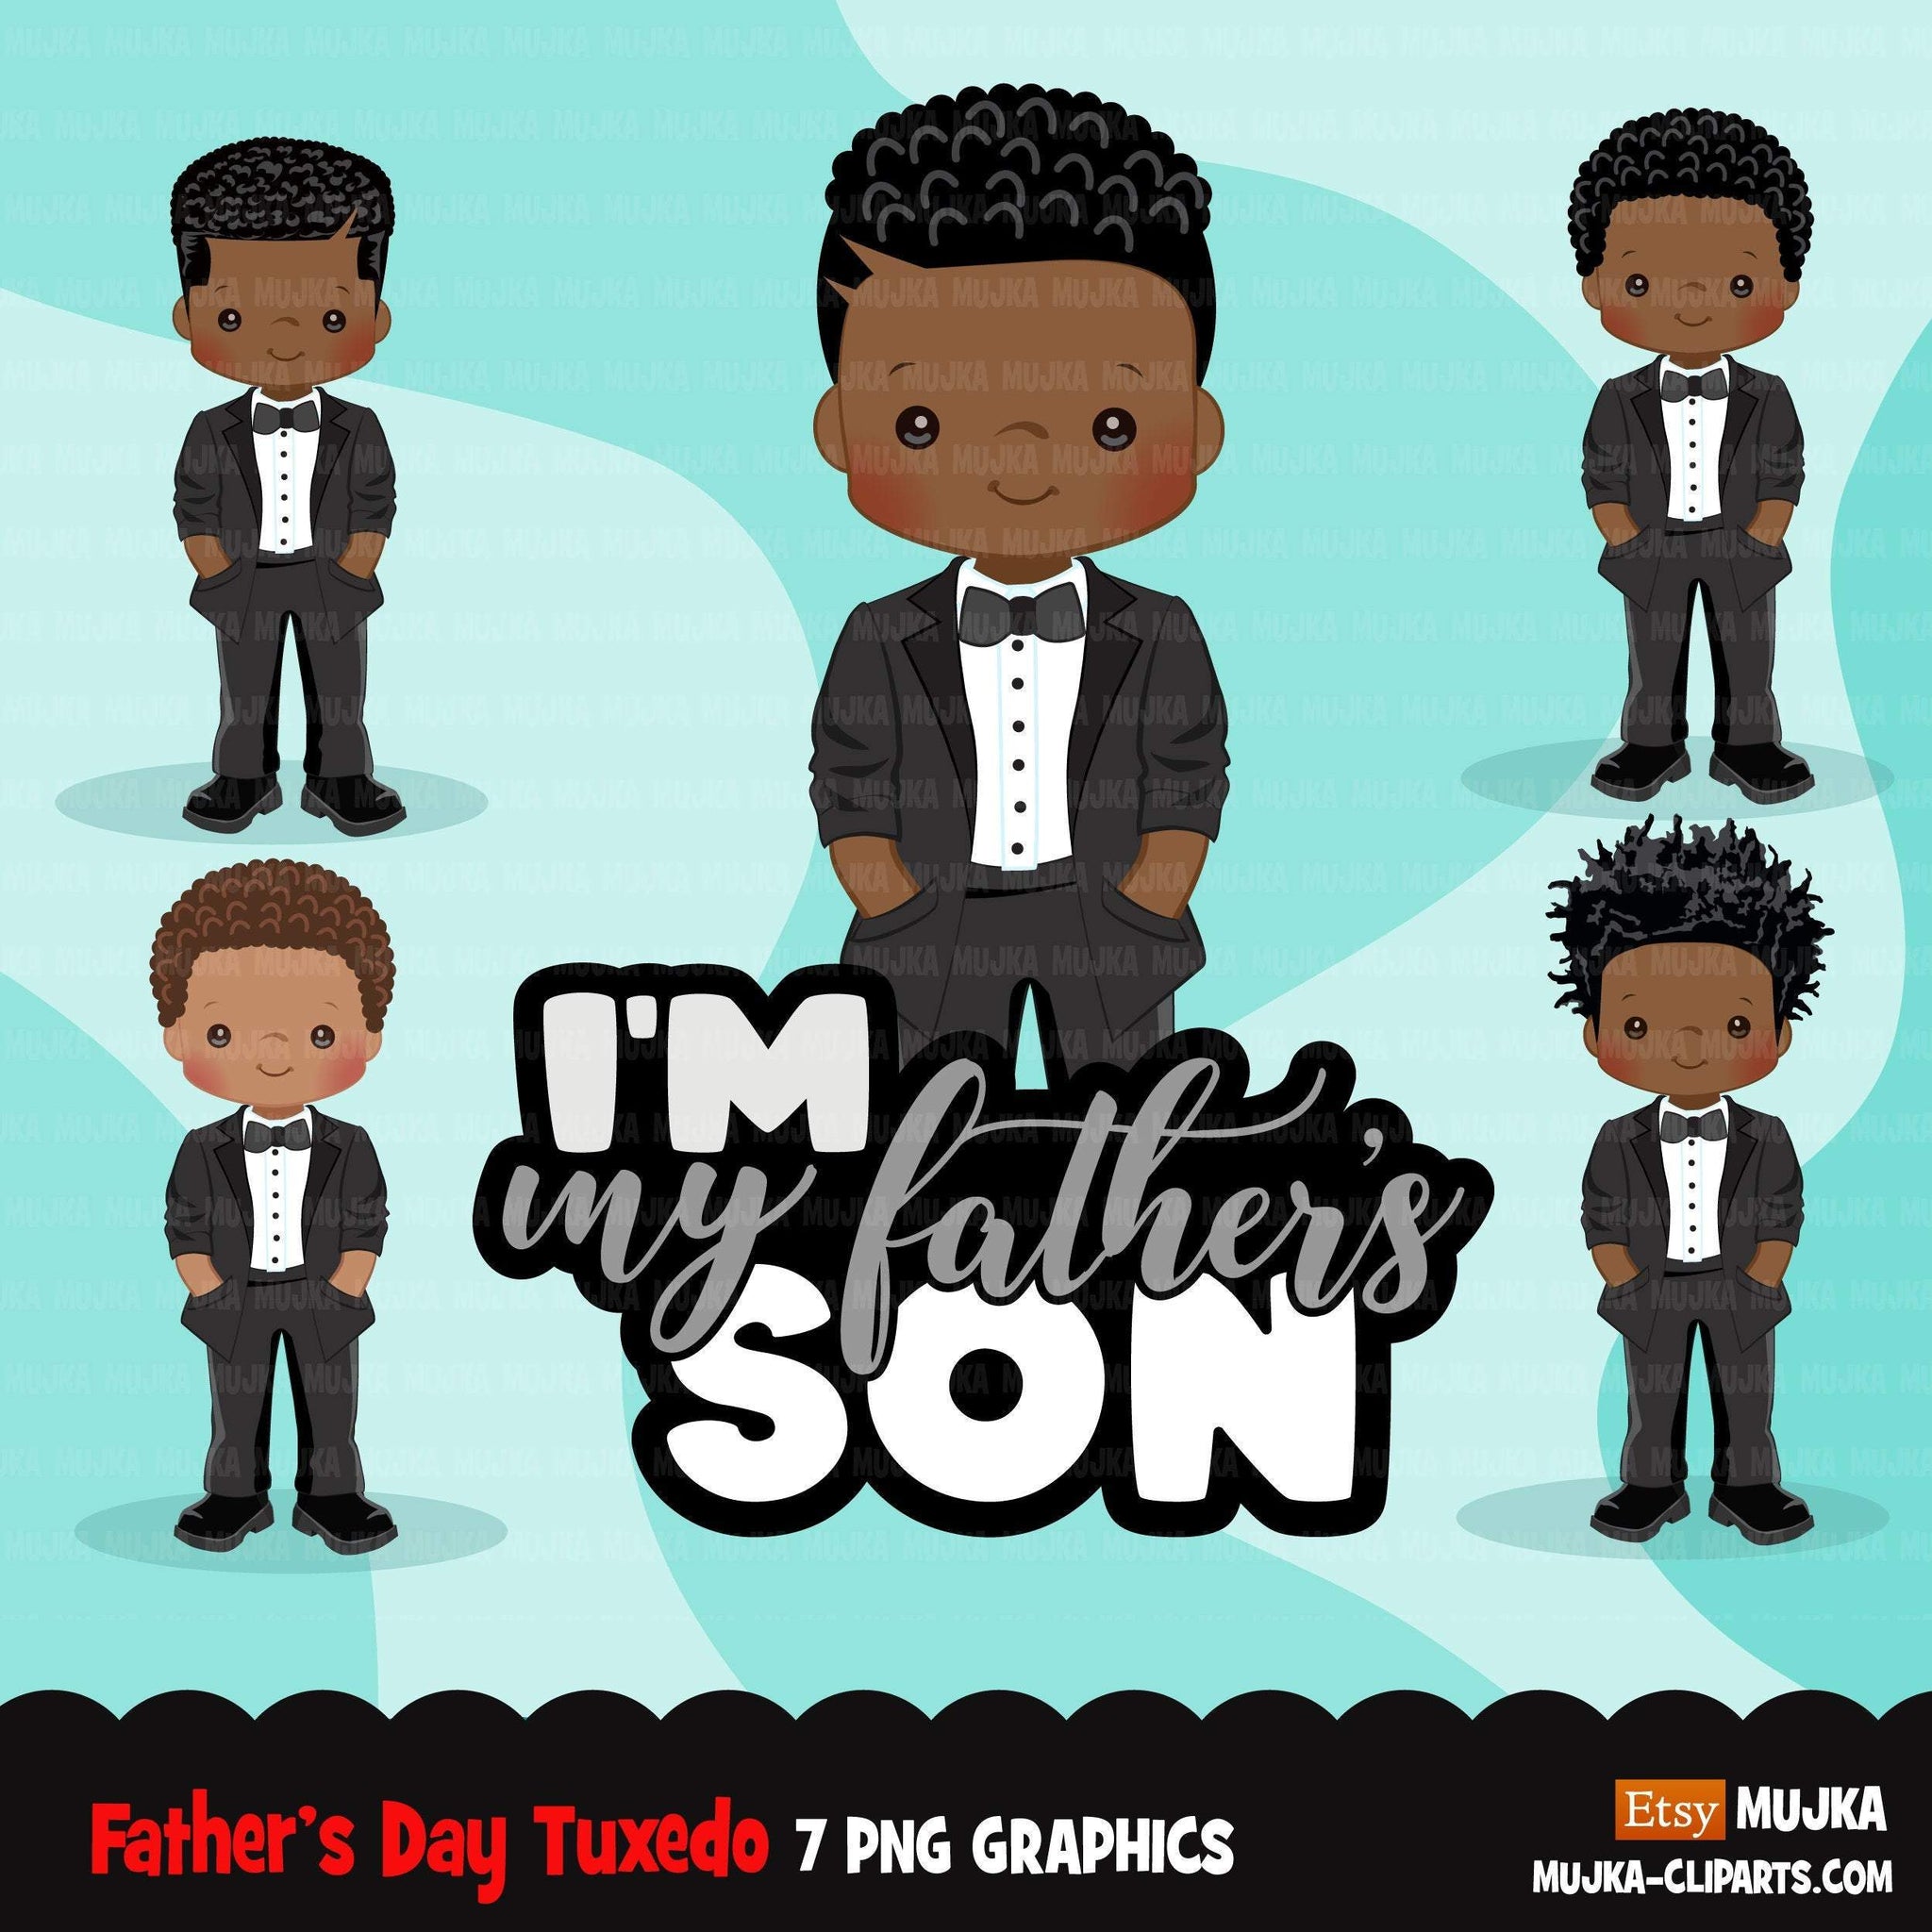 Father's Day clipart, Black boy with tuxedo, I am my father's son quote, dad graphics, commercial use PNG clip art